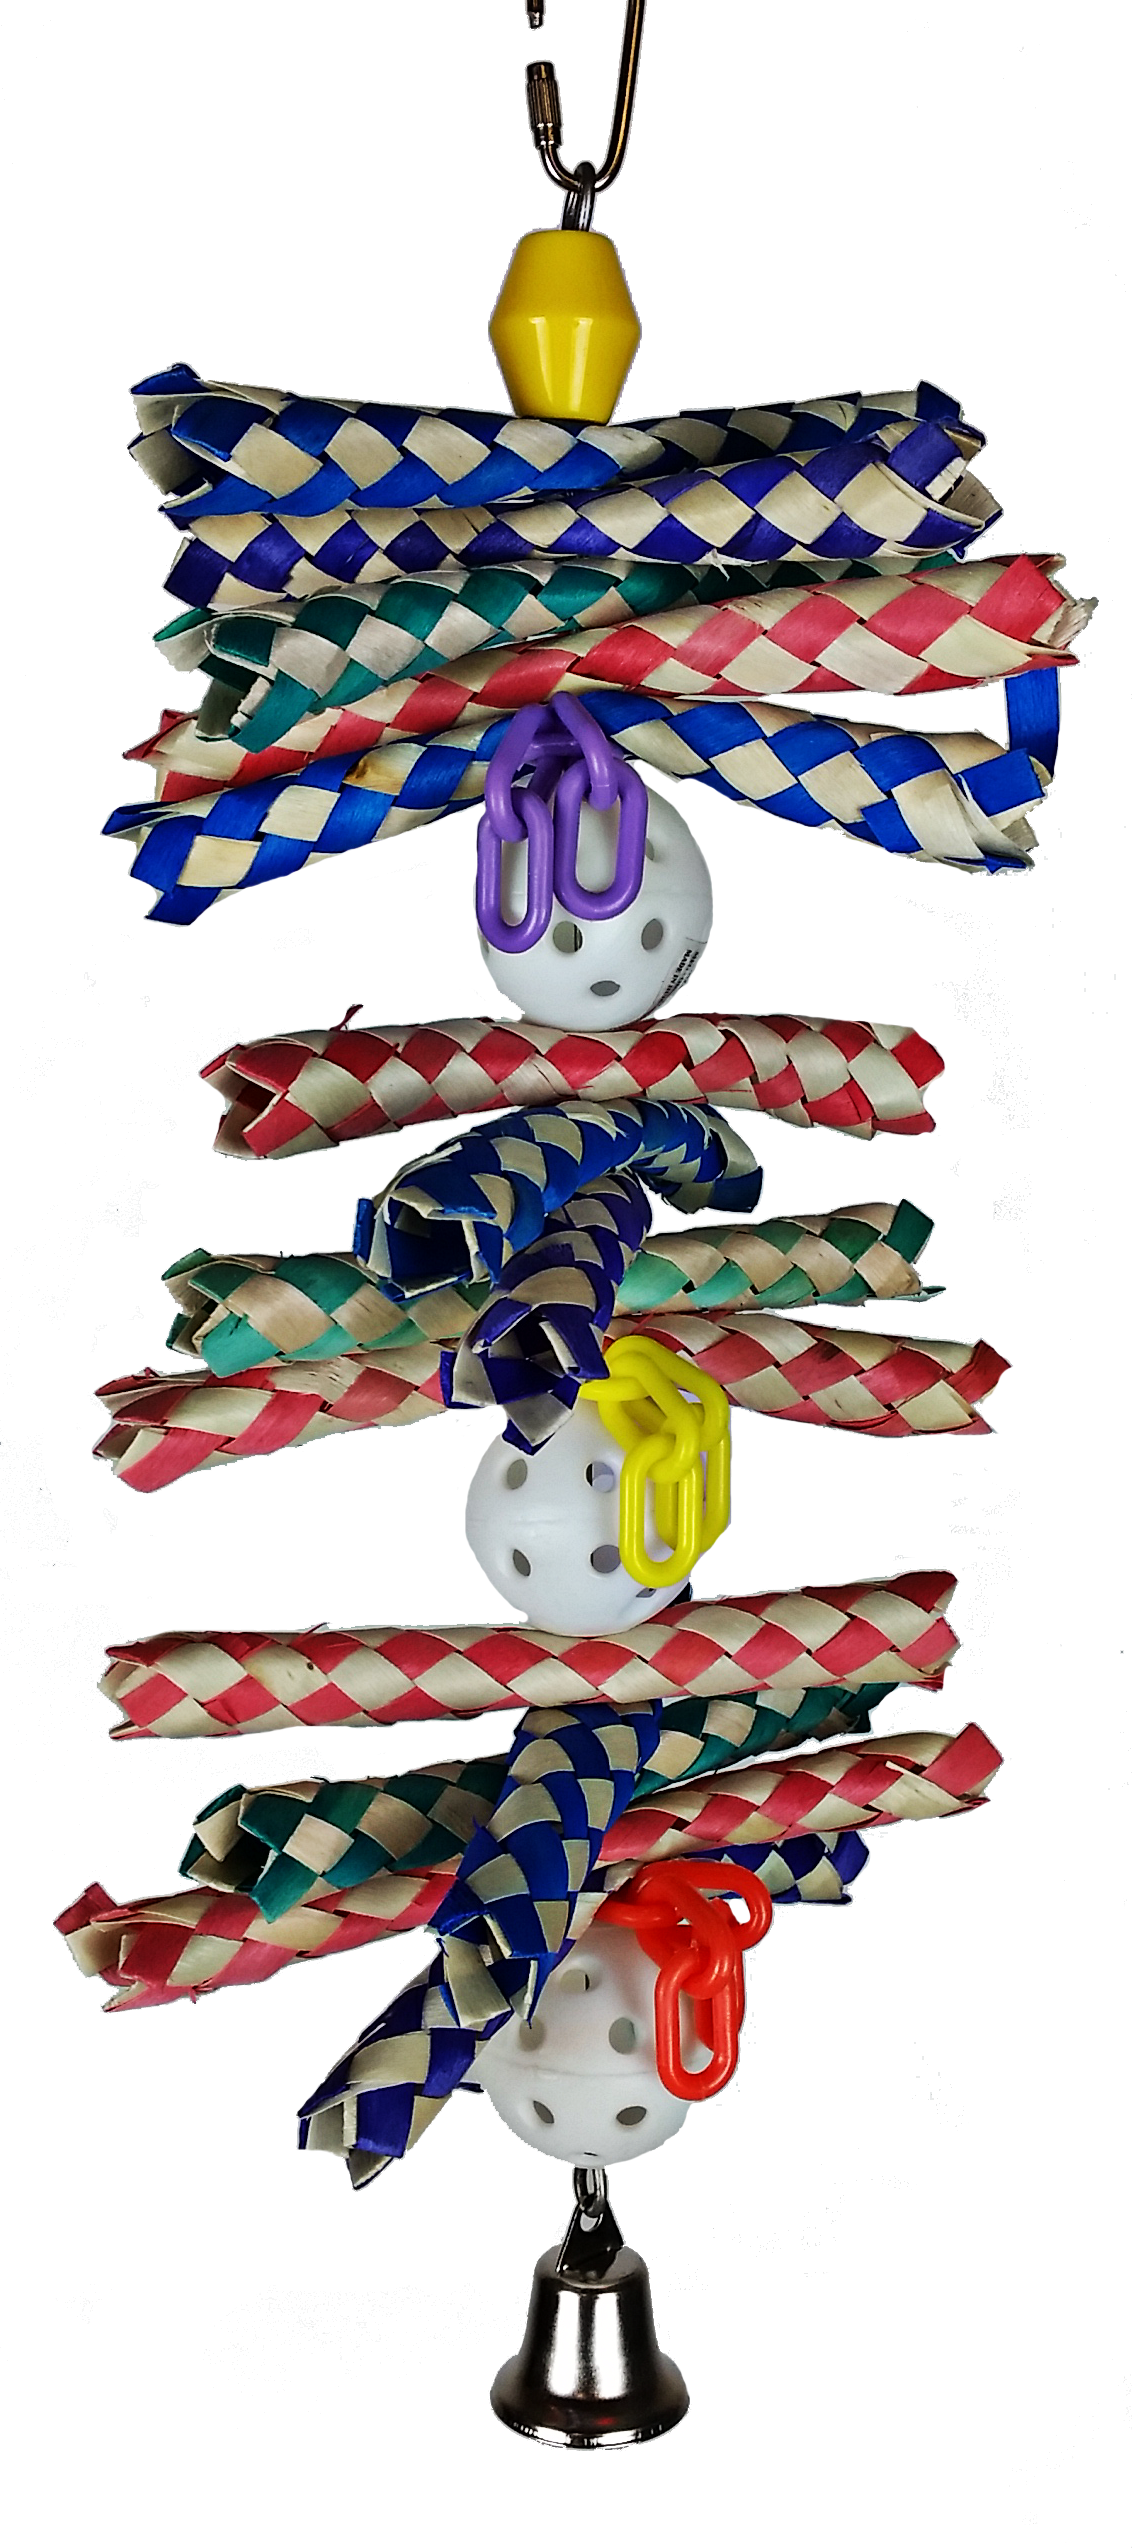 A & E Cage Company - Finger Stack Bird Toy